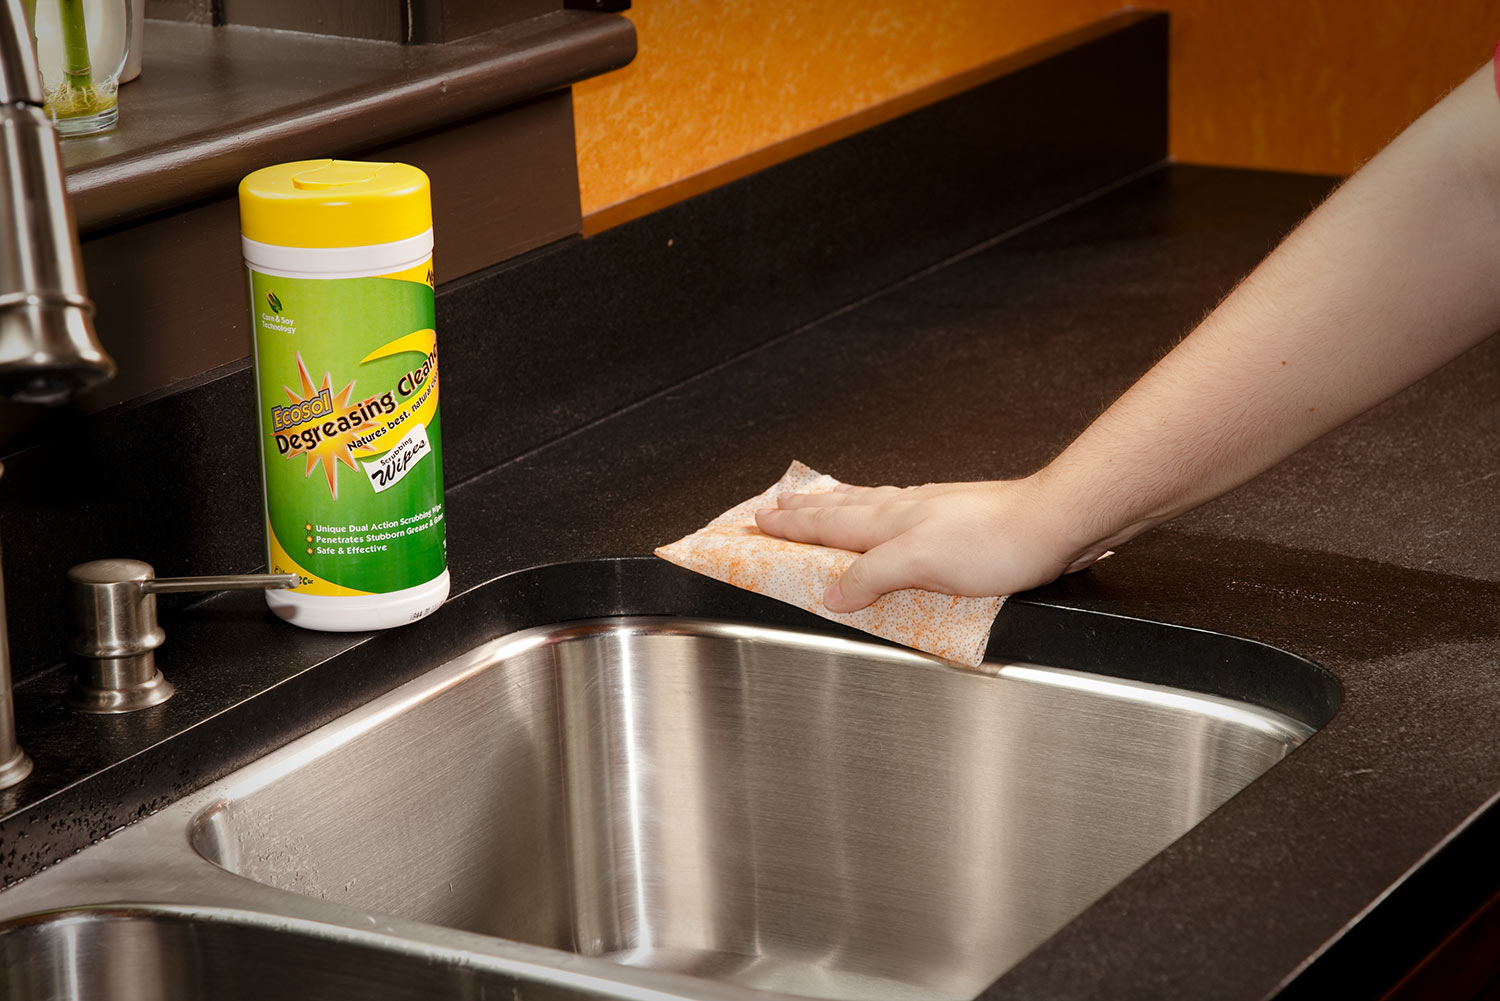 A hand wipes a kitchen sink with a disinfecting wipe.